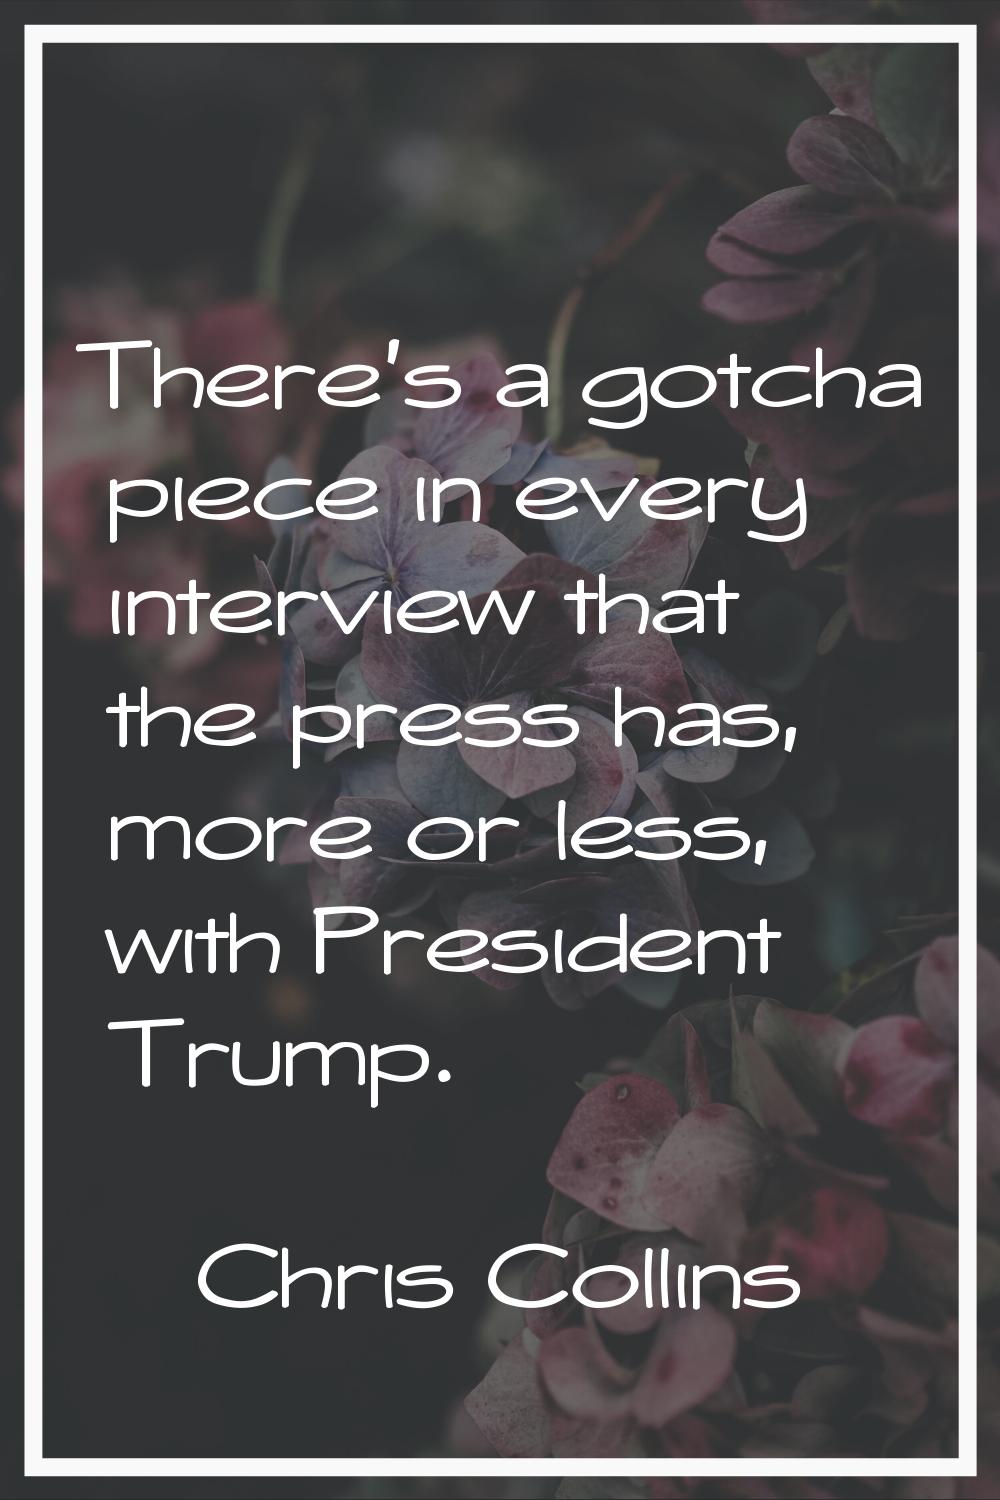 There's a gotcha piece in every interview that the press has, more or less, with President Trump.